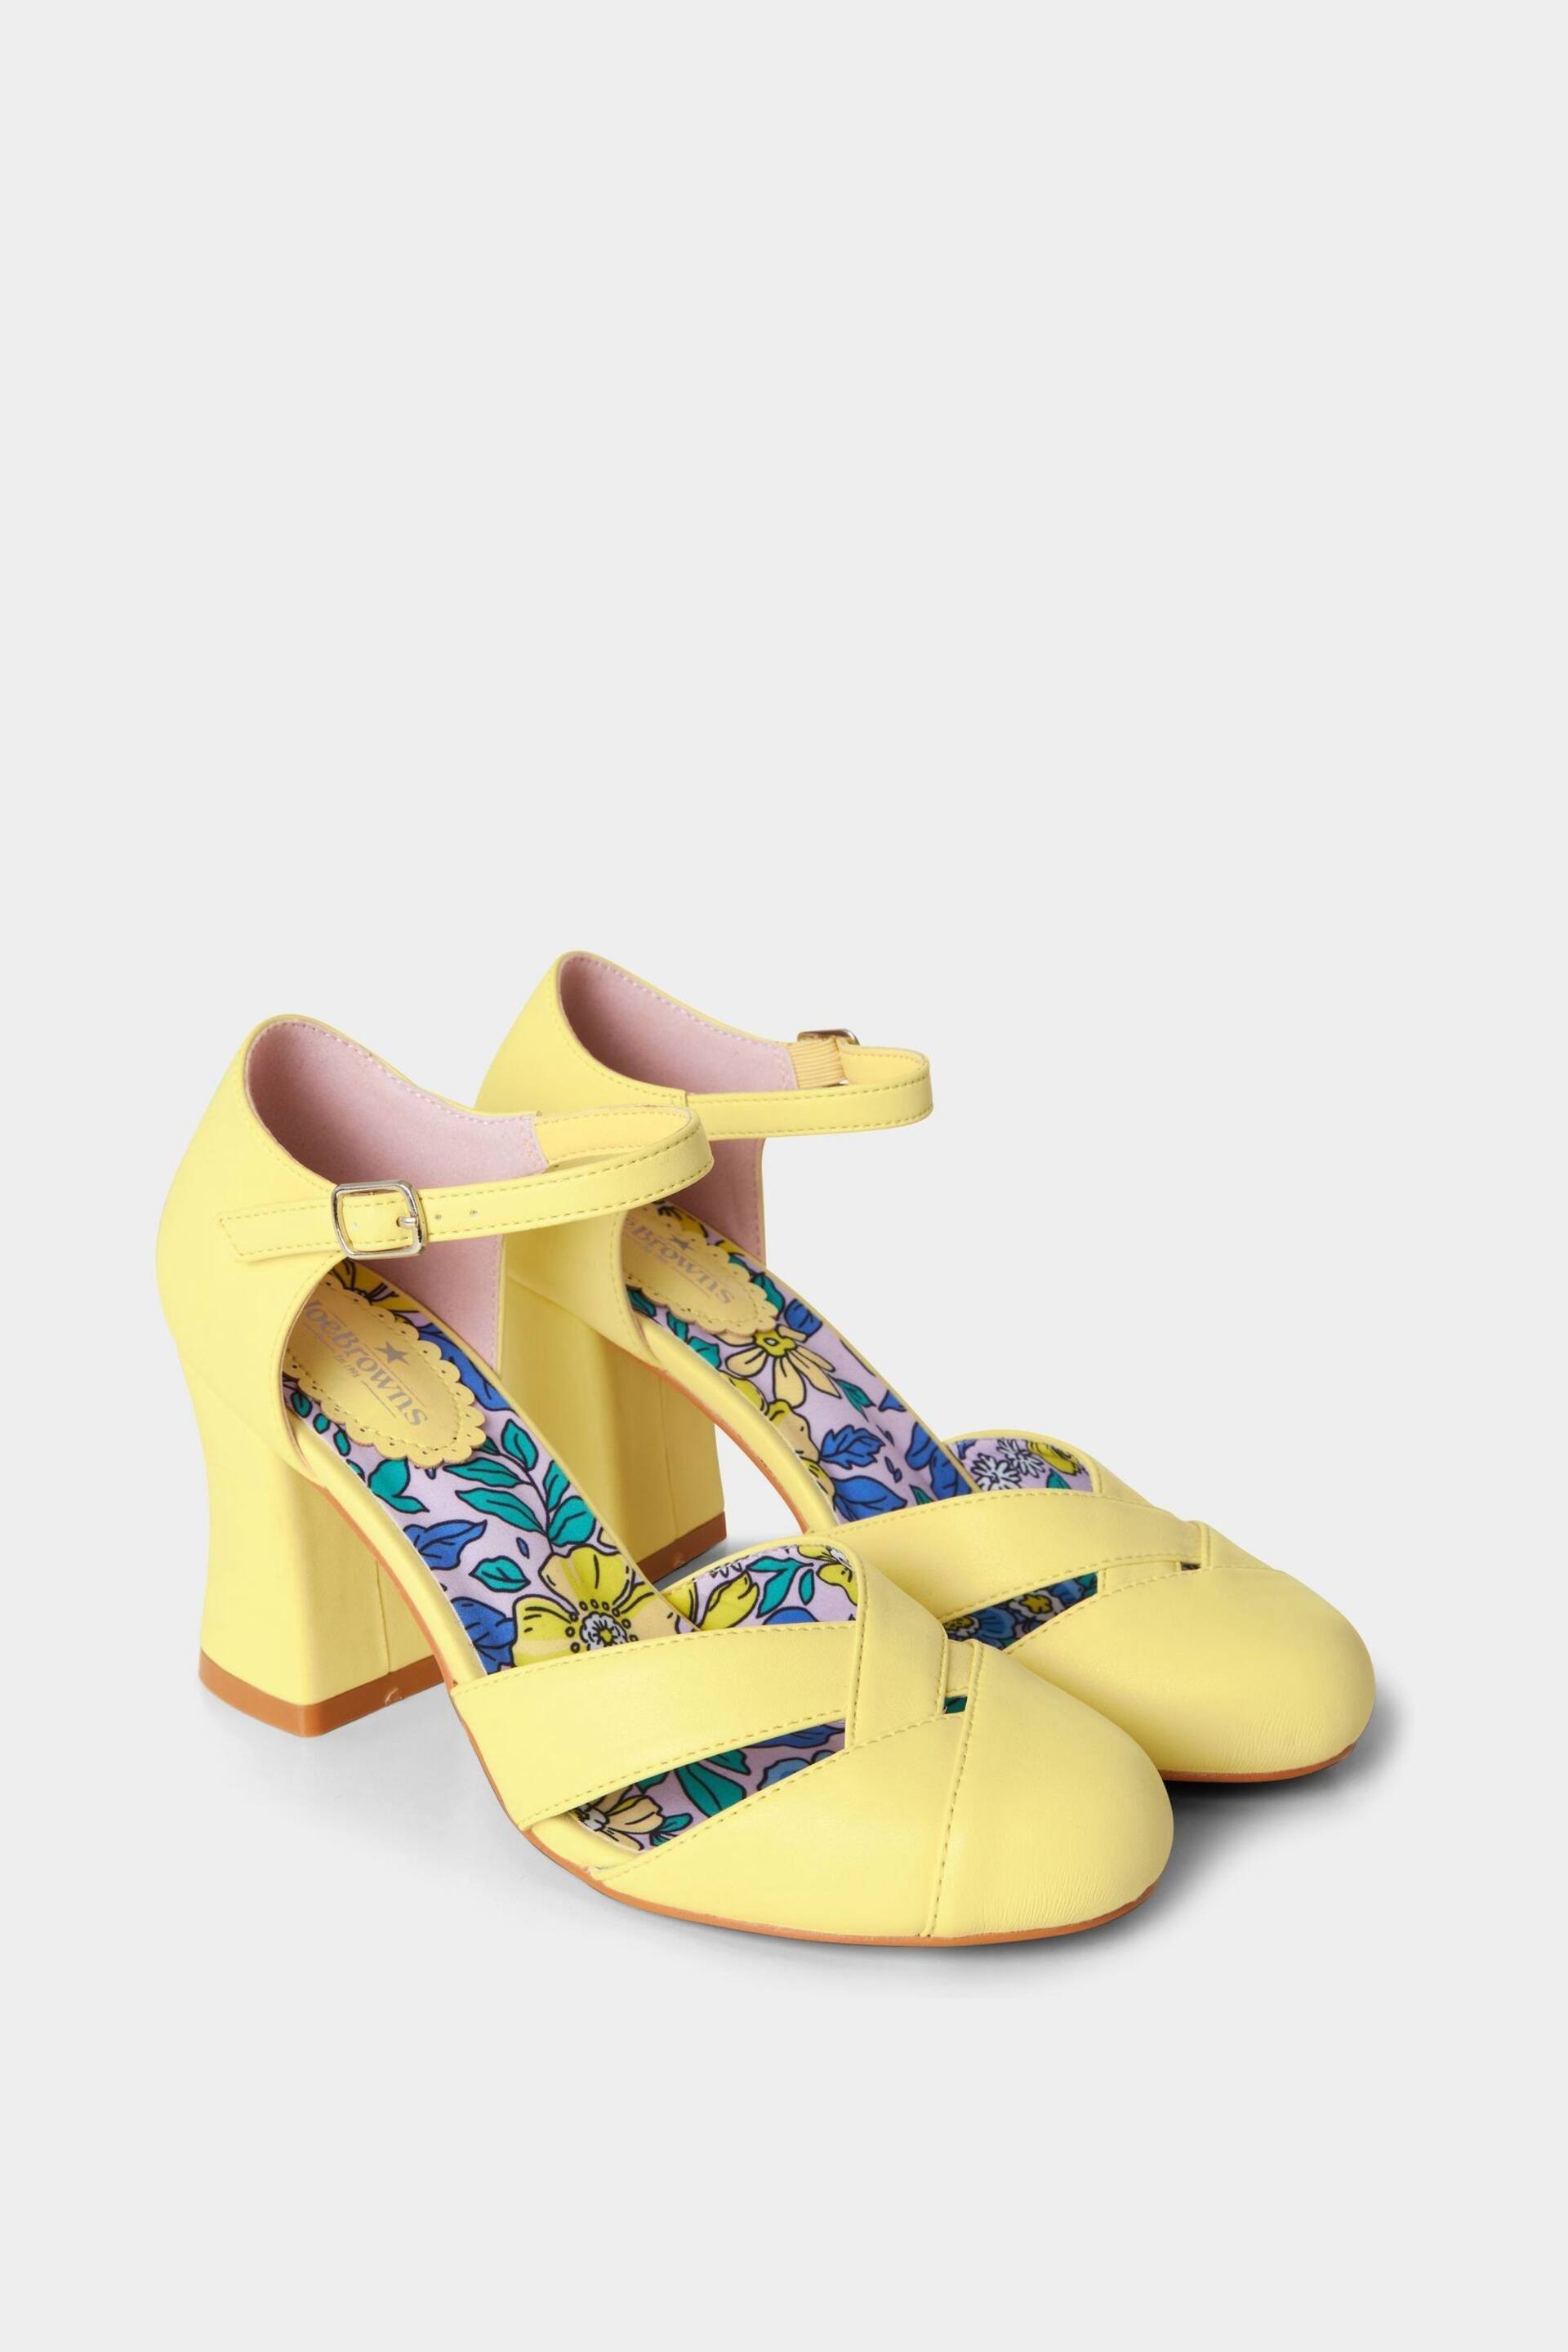 Joe Browns Yellow Summery Vintage Heeled Shoes - Image 1 of 5